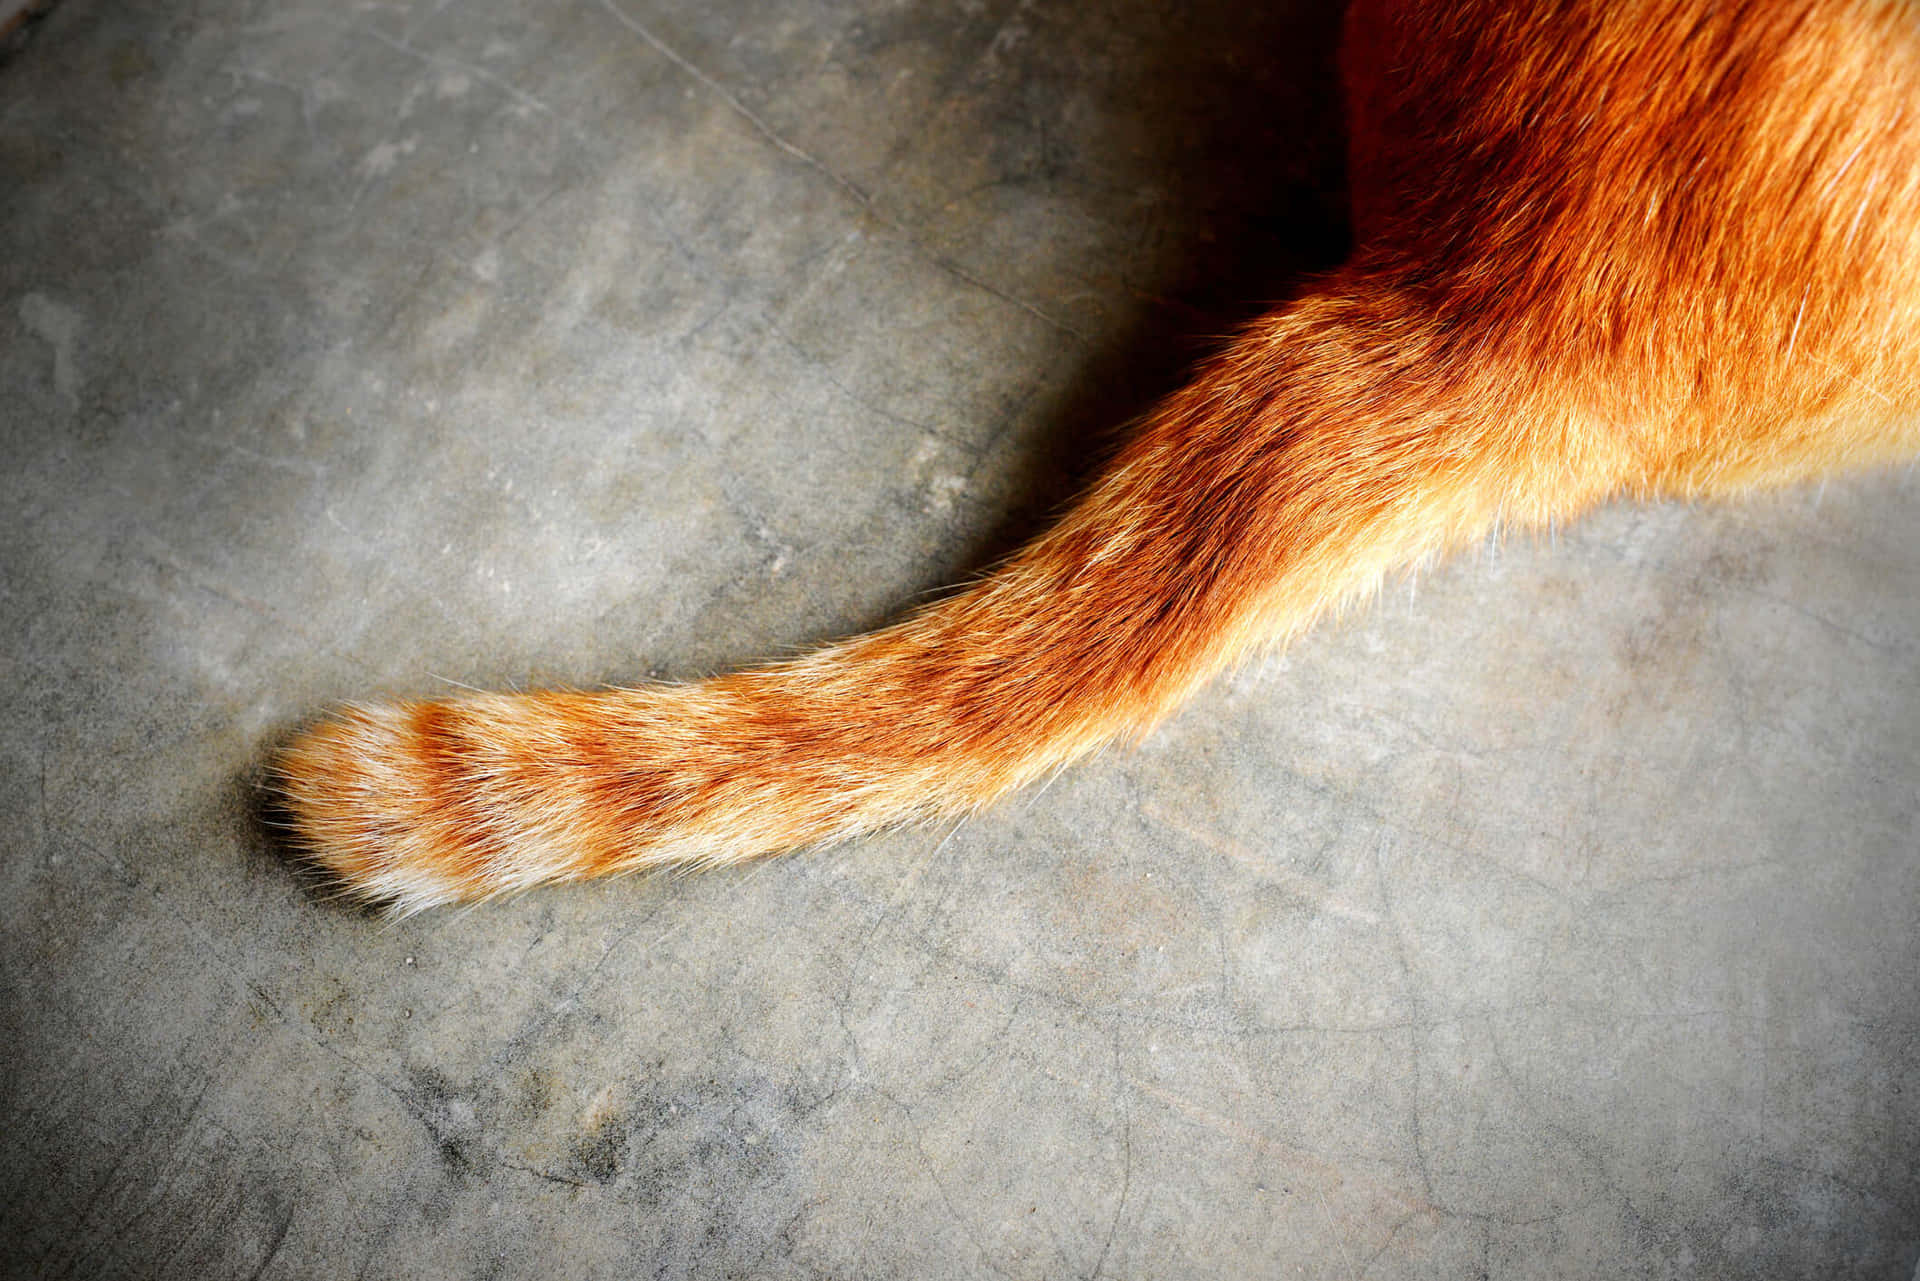 "Adorable Cat Tail Perfectly Curled Up"